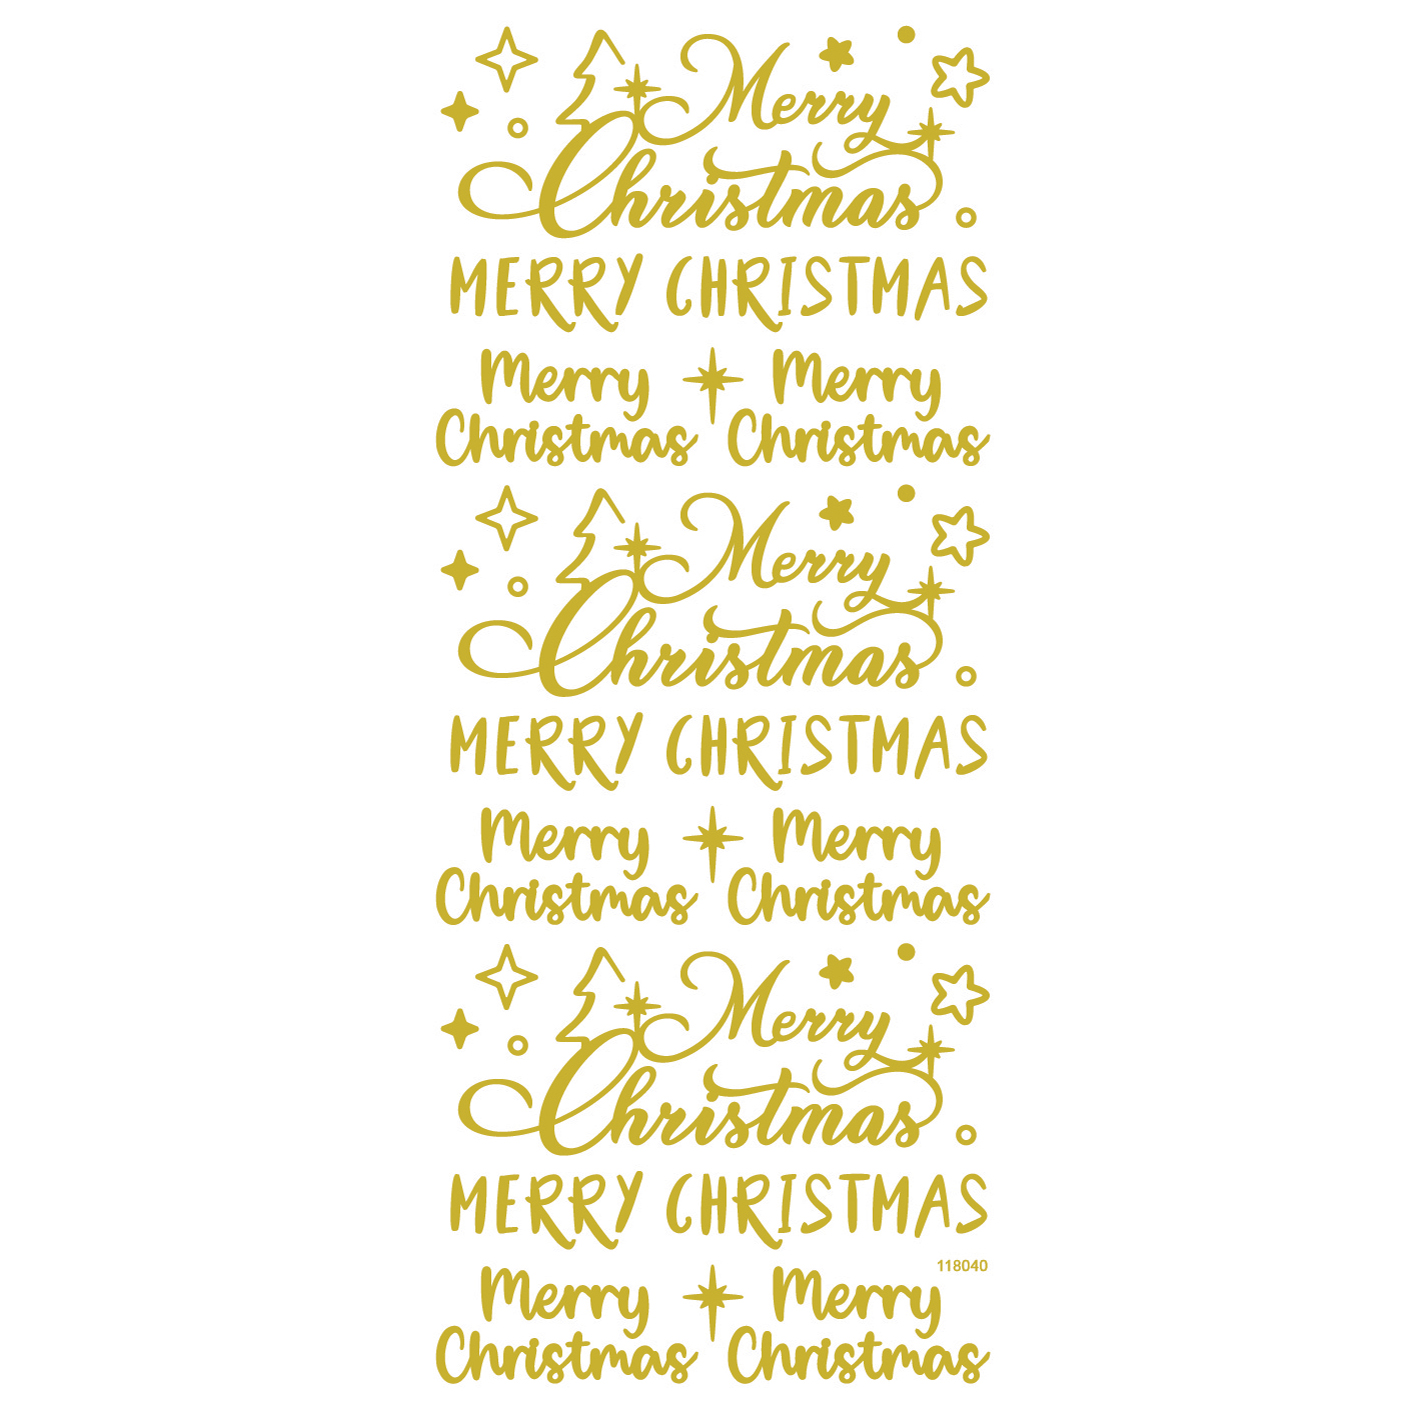 MERRY CHRISTMAS FOILED STICKERS 10PCS